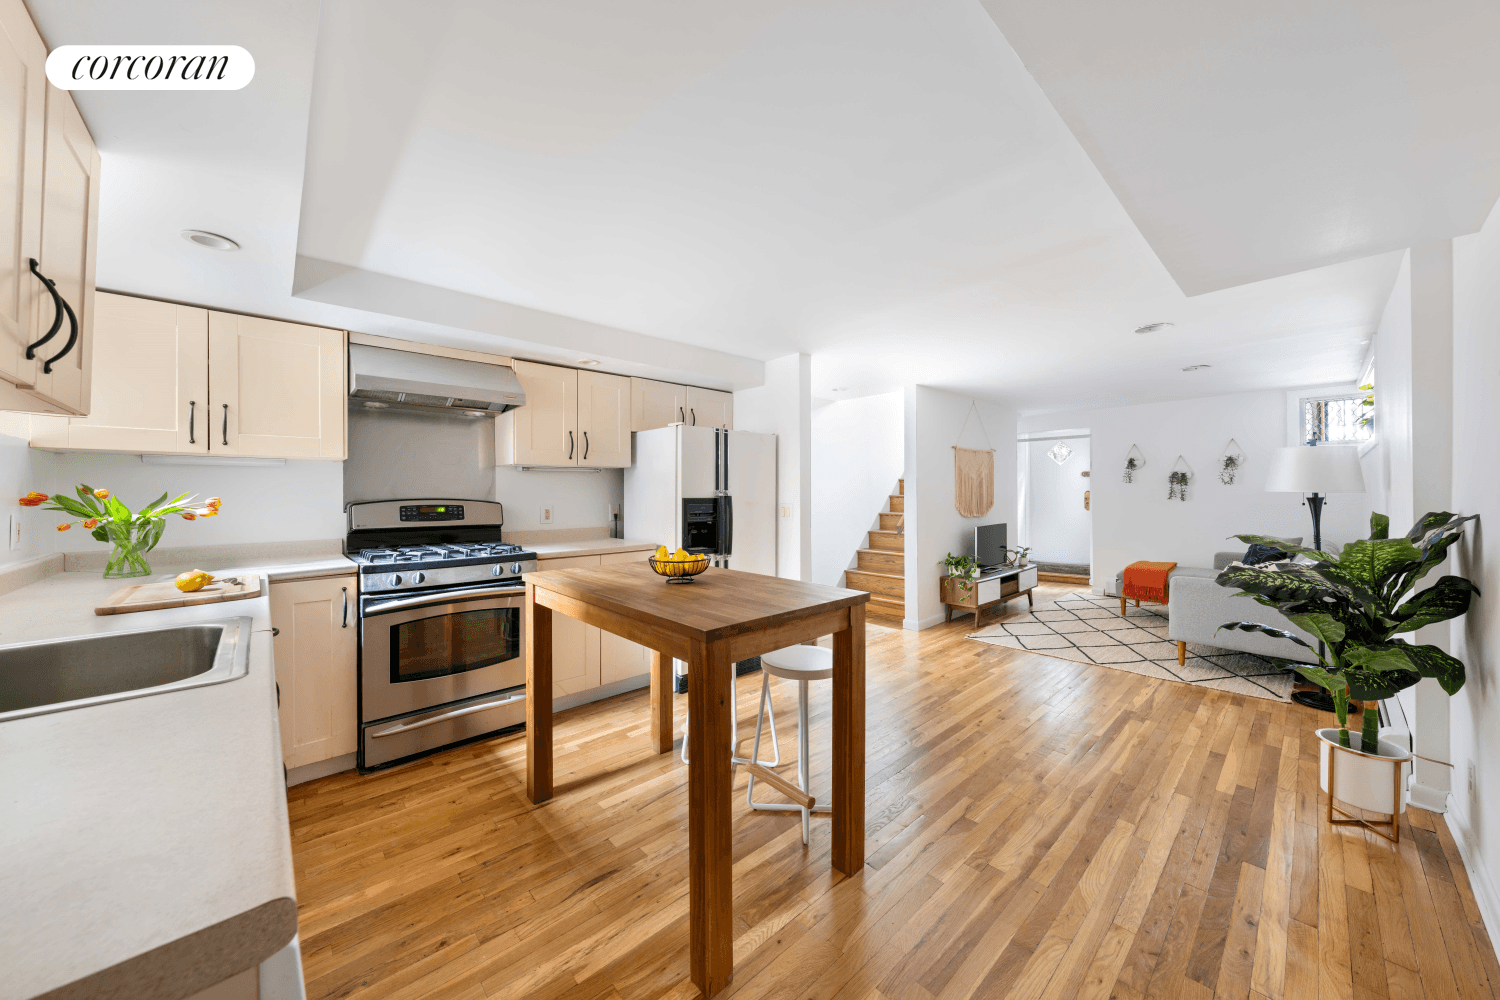 Ideally situated across the street from Prospect Park, apartment 1D is a 2 bedroom, 2 bath duplex located at 92 Prospect Park West, a friendly pre war co op.